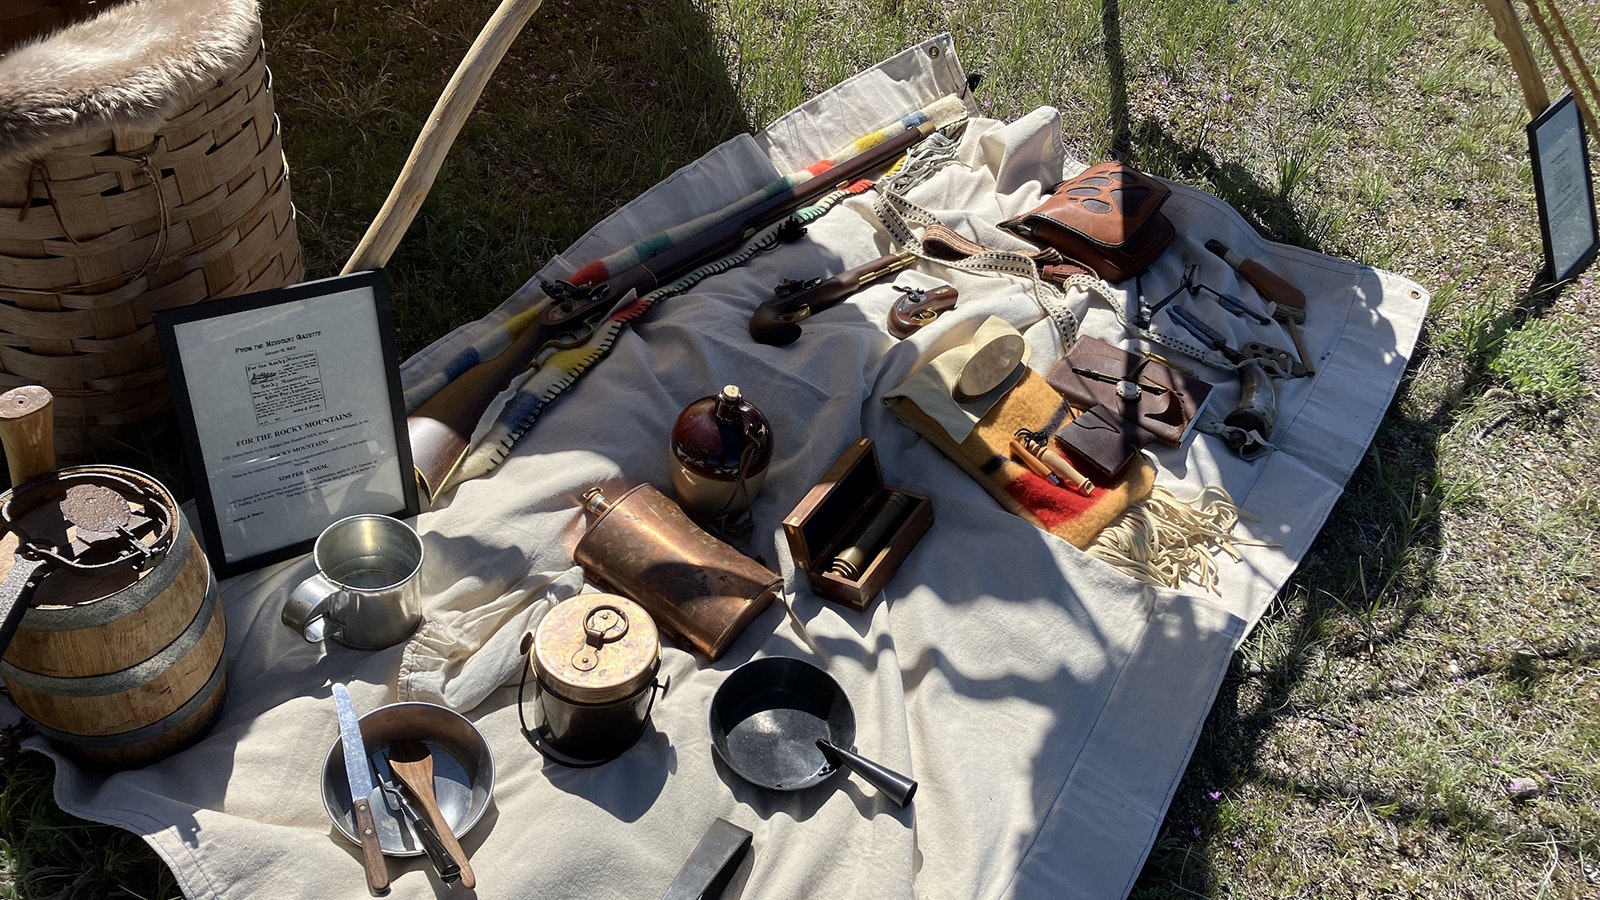 Dale Gregory’s mountain man possessions include a flintlock rifle and beaver traps, as well as some other conveniences for the time.